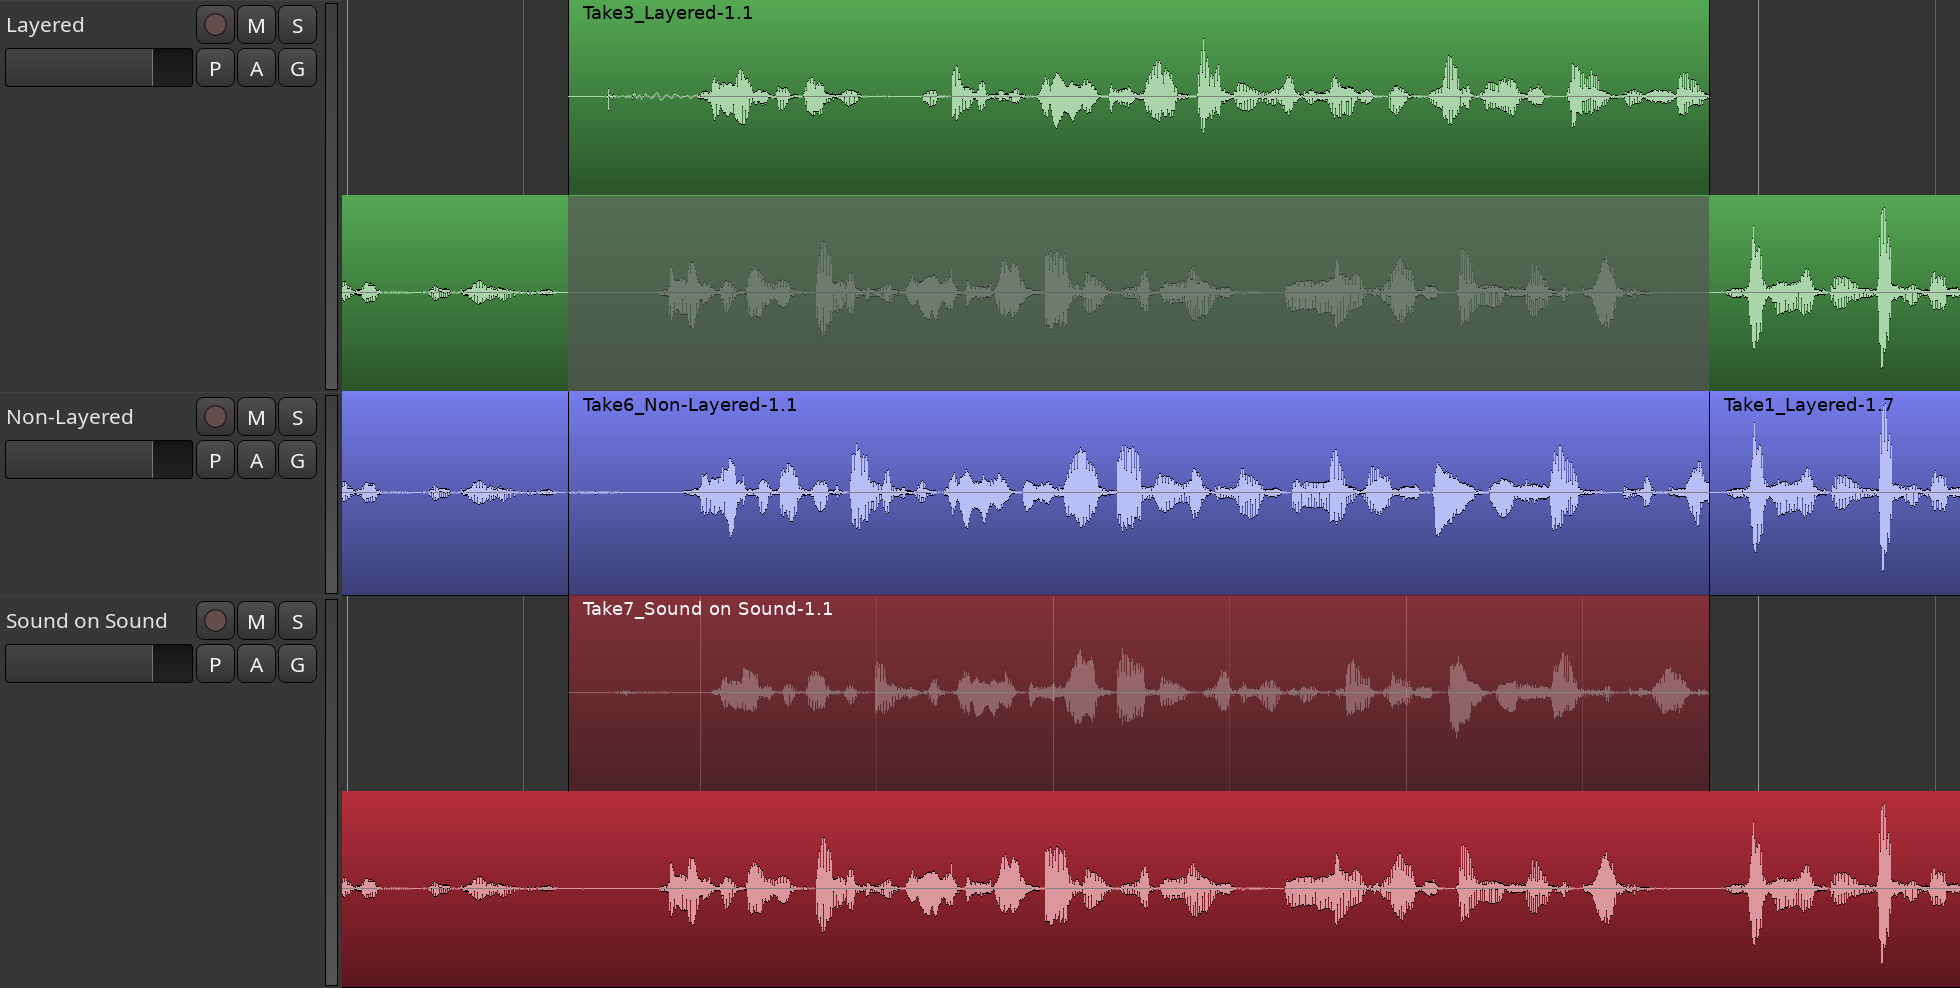 Layered, non-layered, and sound-on-sound modes in stacked view